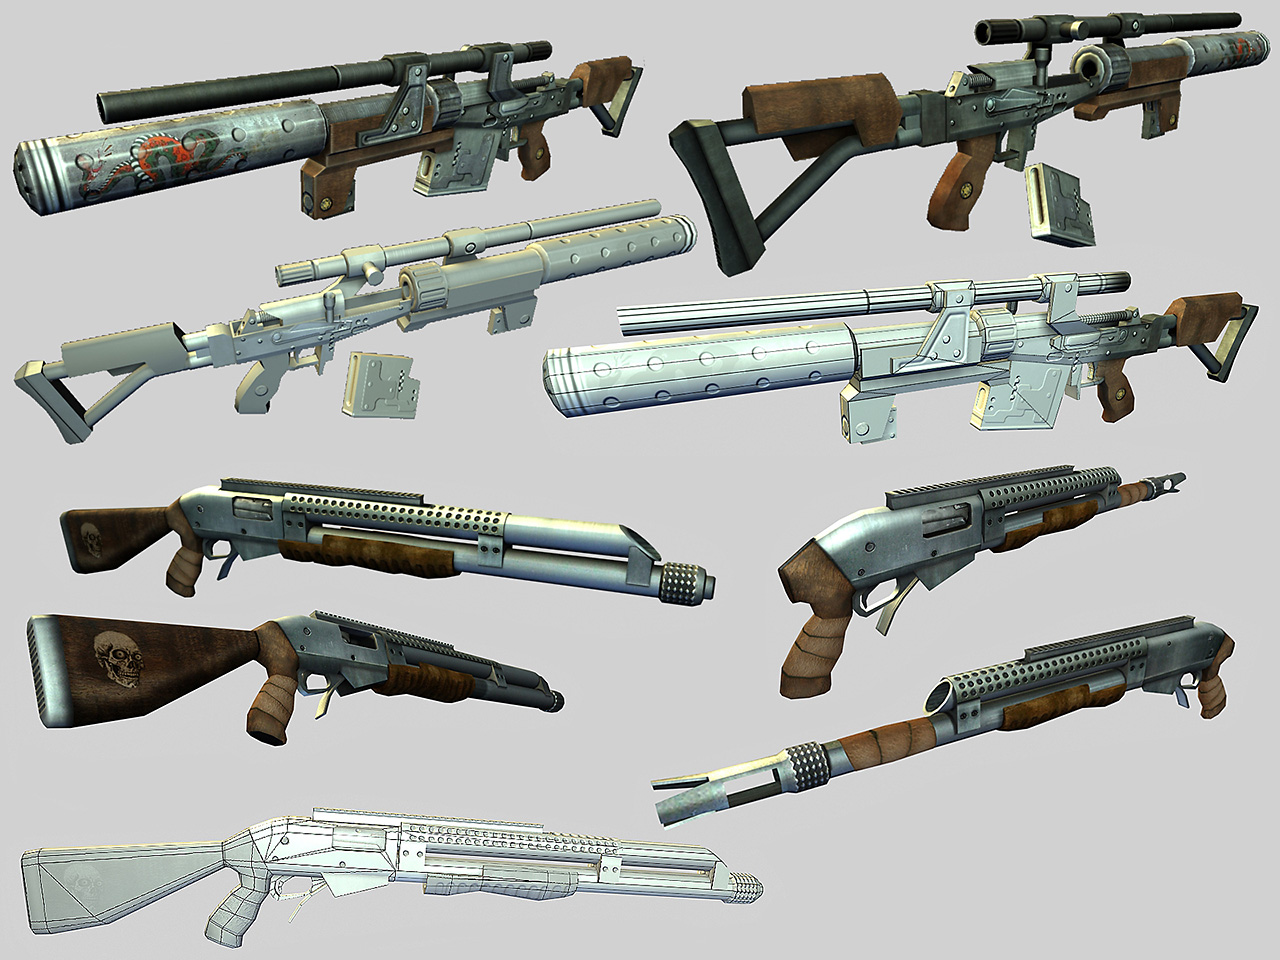 Stylized weapon designs loosely based on real-world weapons